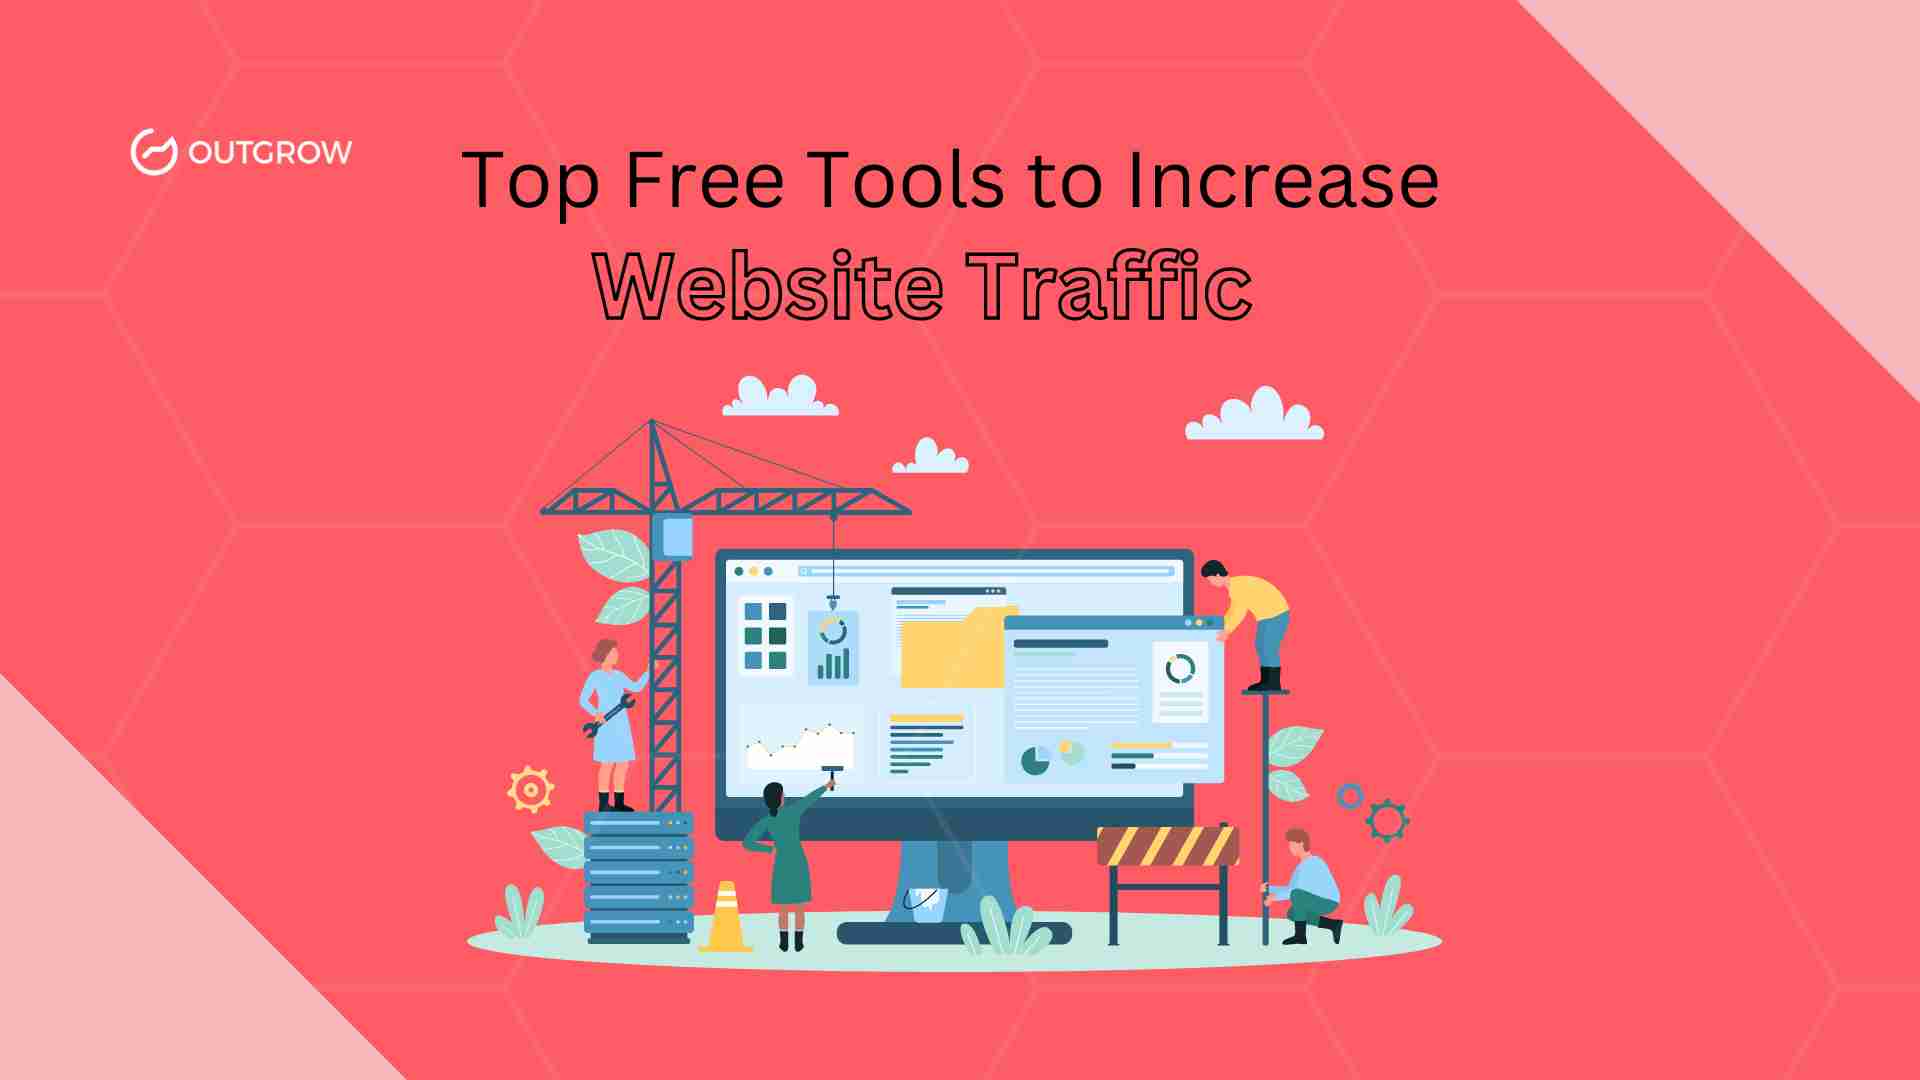 Top-free-tools-to-increase-website-traffic